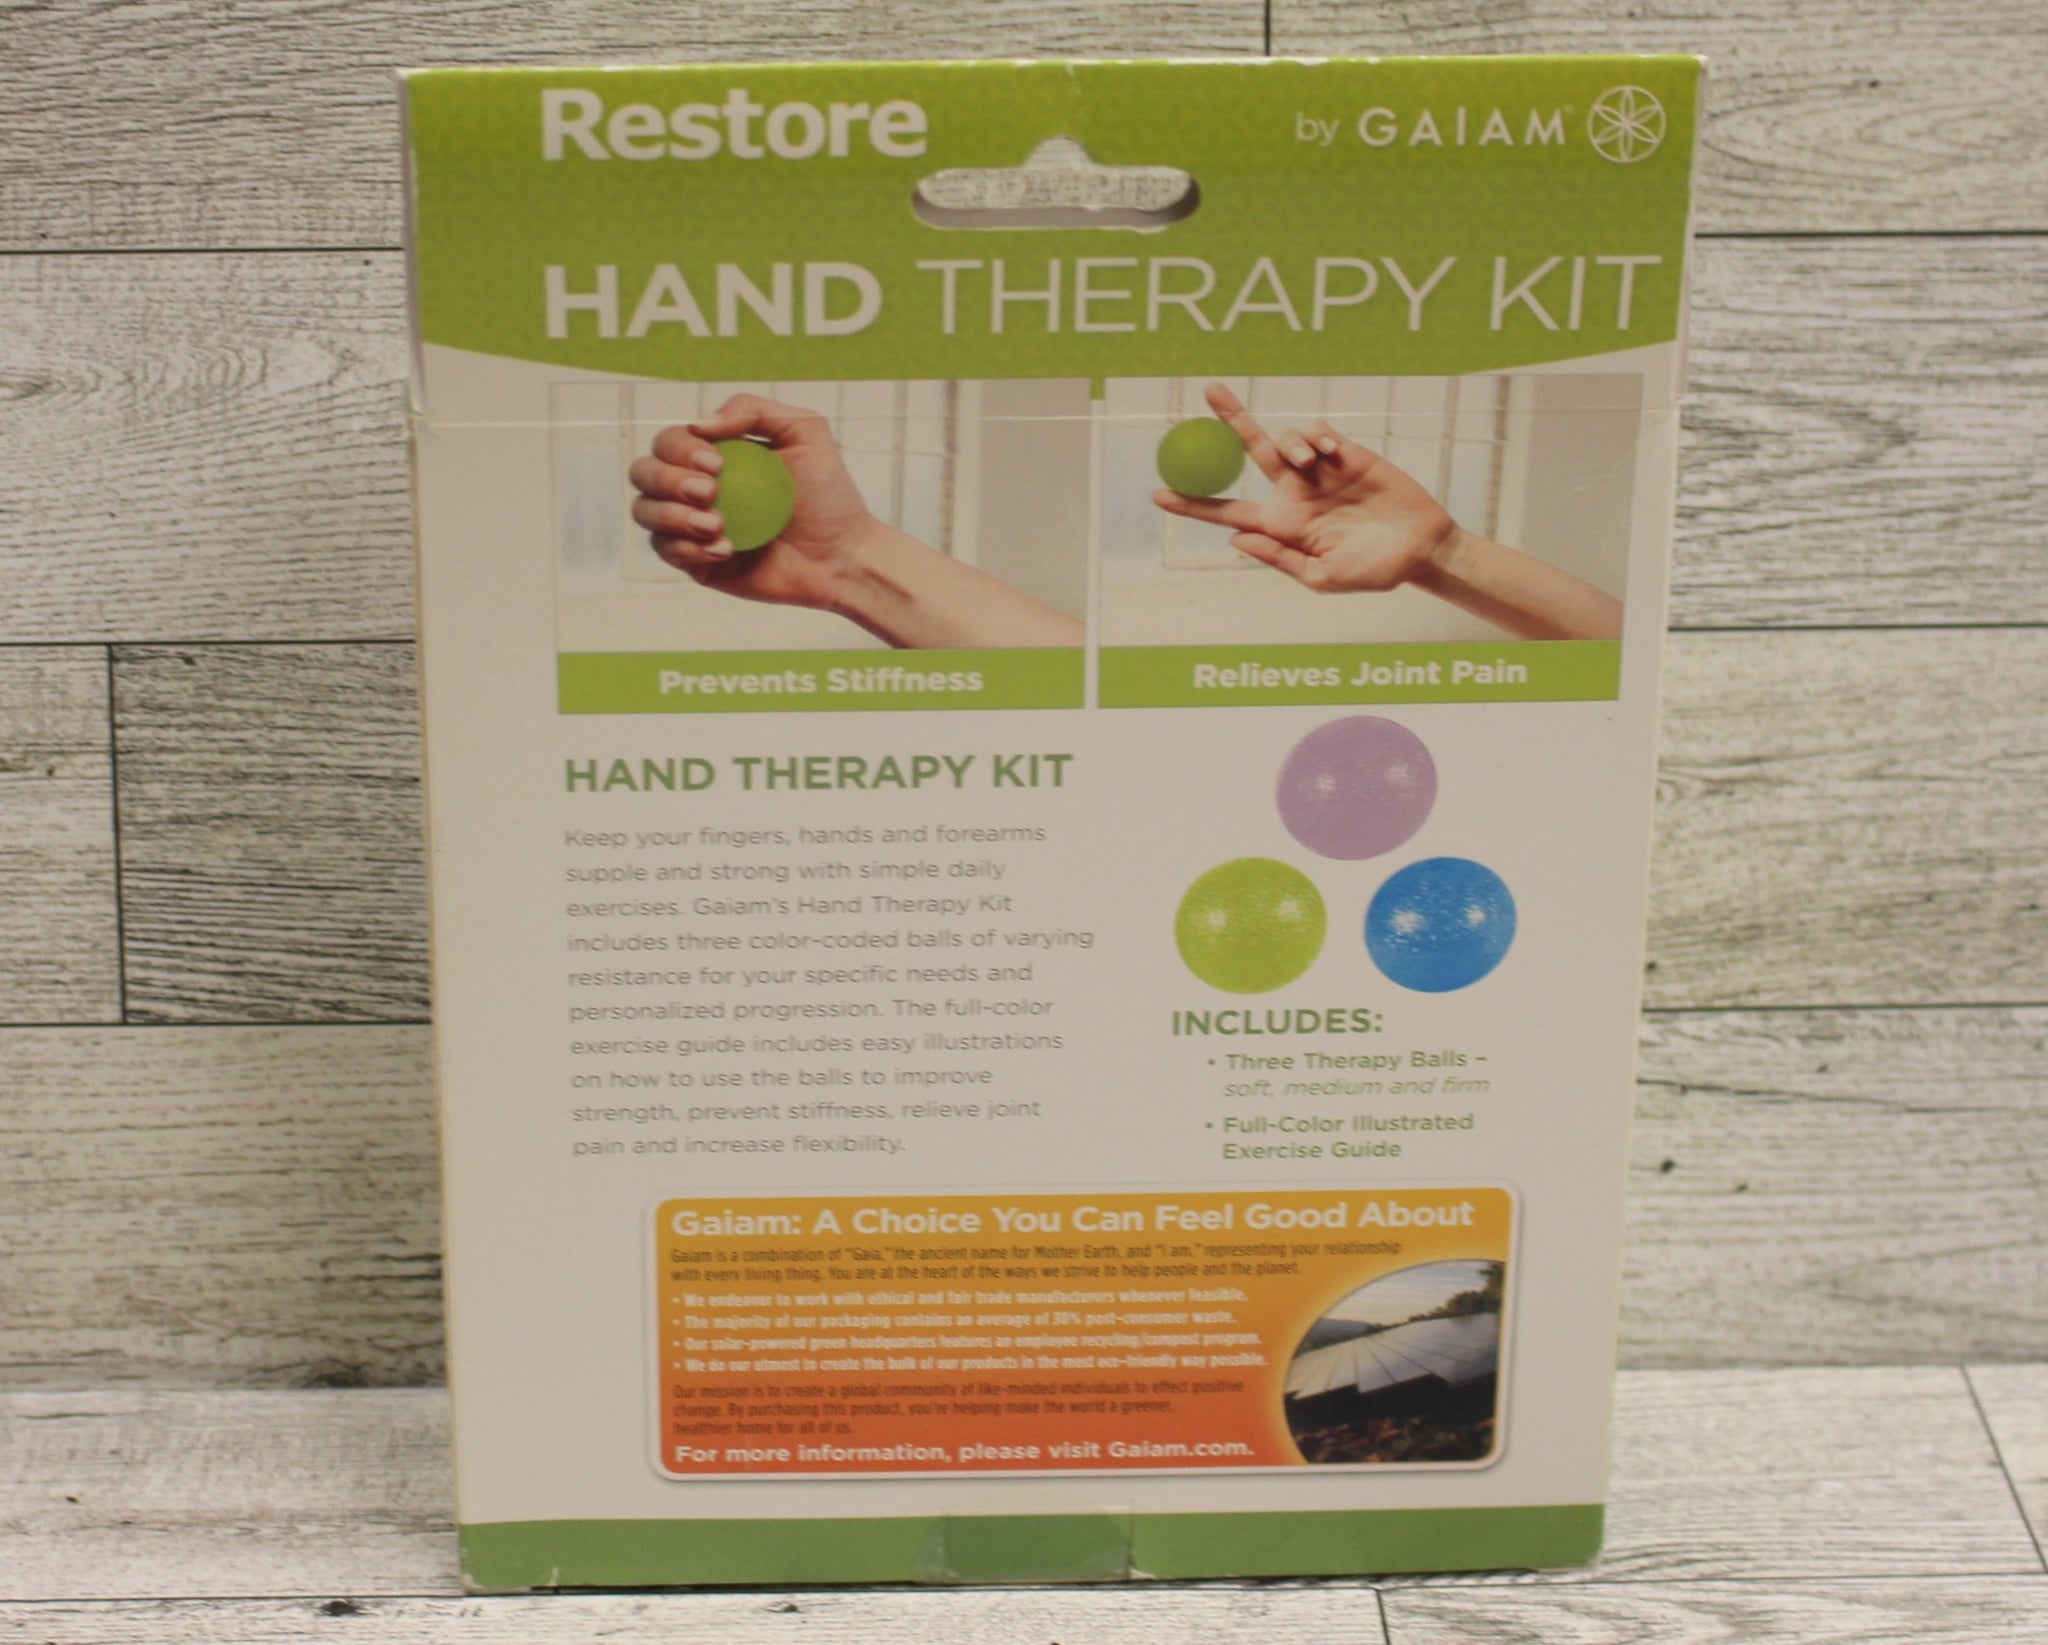 Gaiam Restore Hand Therapy Kit with Exercise Balls - 3 Pack - New –  Military Steals and Surplus